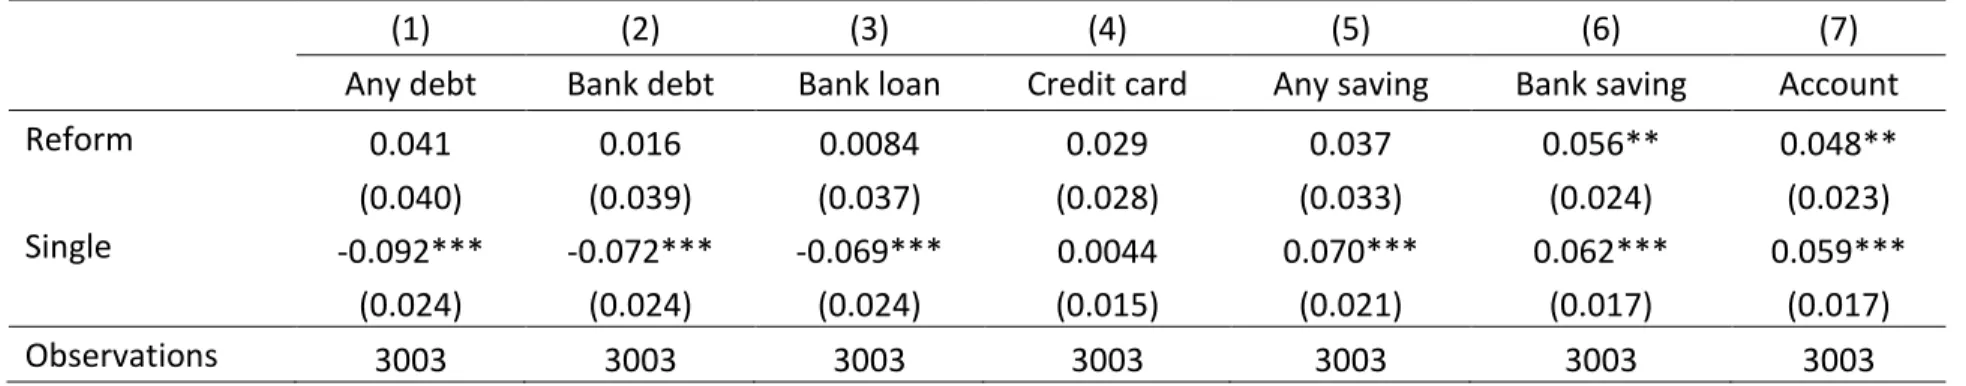 Table 13: Effect of Reform on household financial behavior (controlling for marital status) 